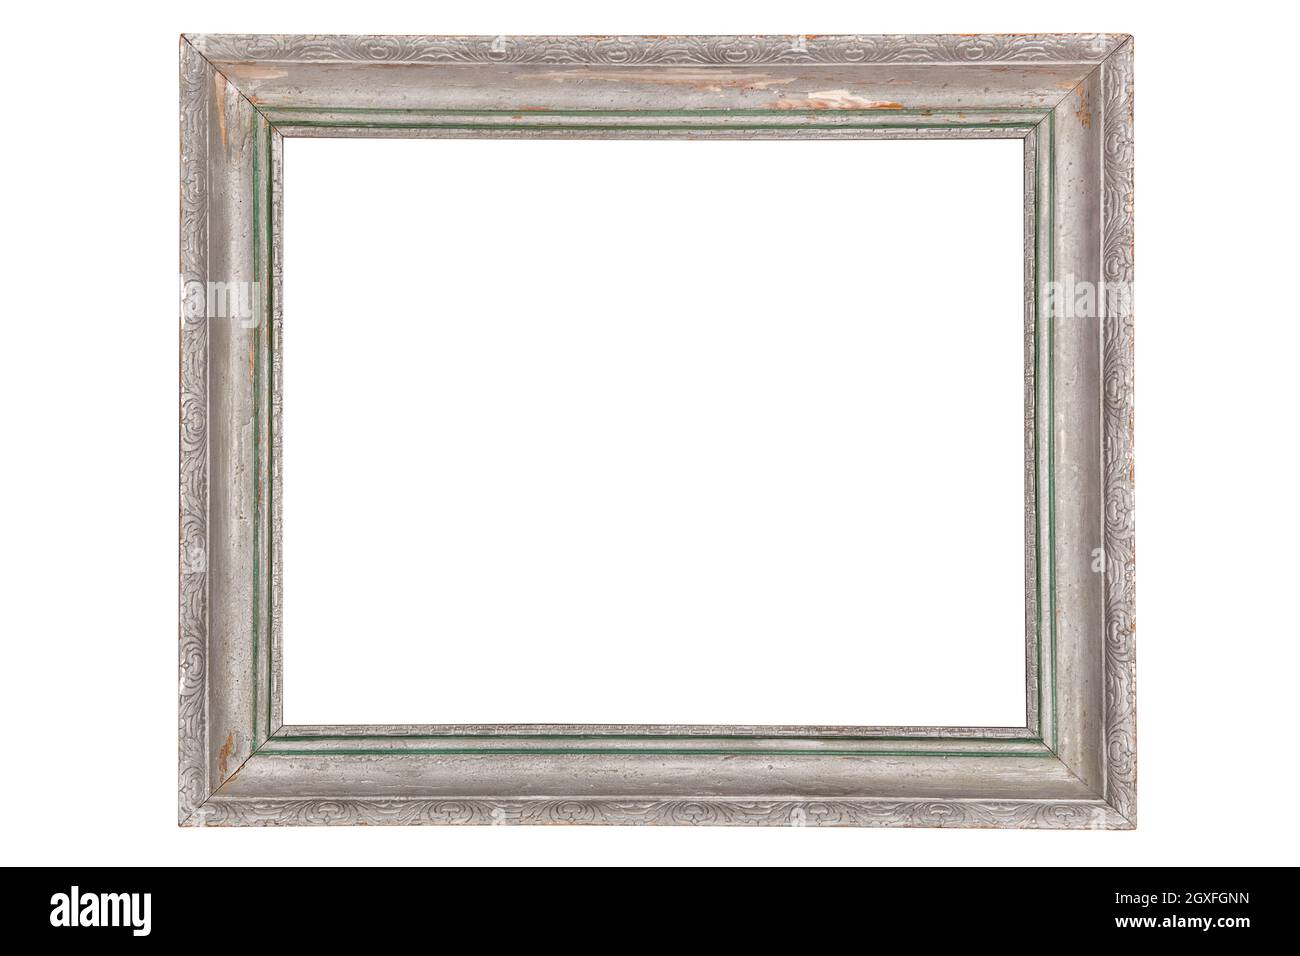 Old vintage silver picture frame isolated on white background with clipping path. Stock Photo